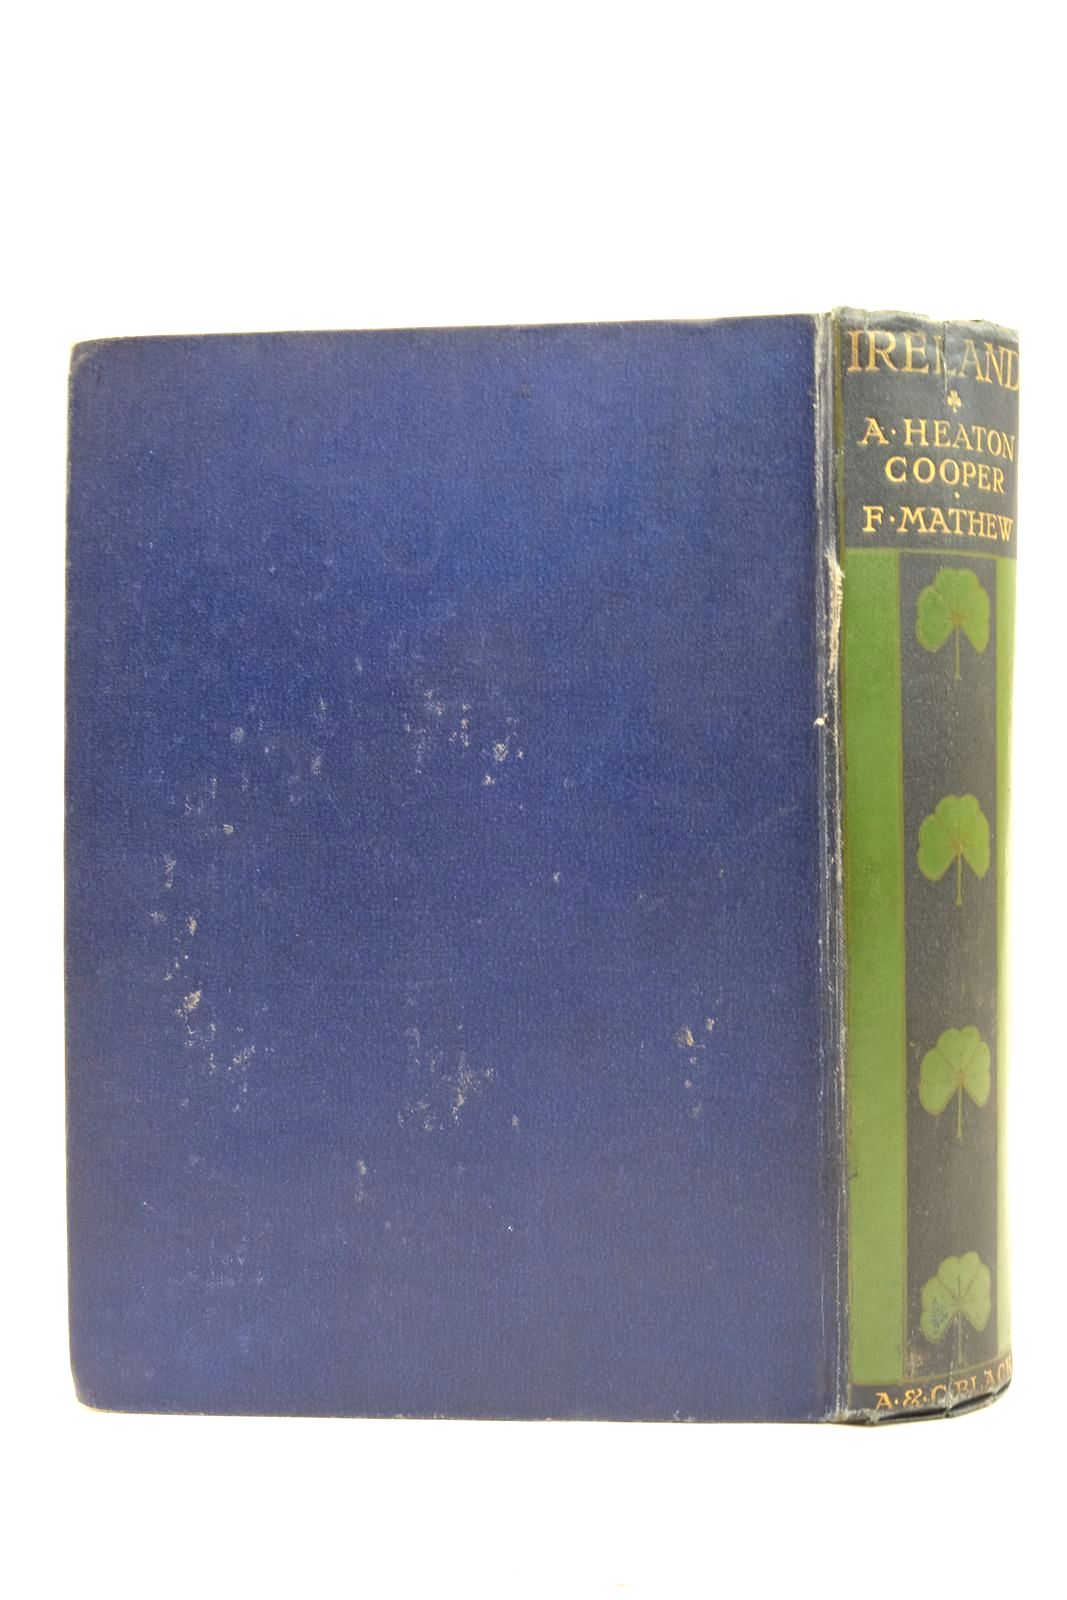 Photo of IRELAND written by Mathew, Frank illustrated by Cooper, A. Heaton published by A. & C. Black Ltd. (STOCK CODE: 2137240)  for sale by Stella & Rose's Books